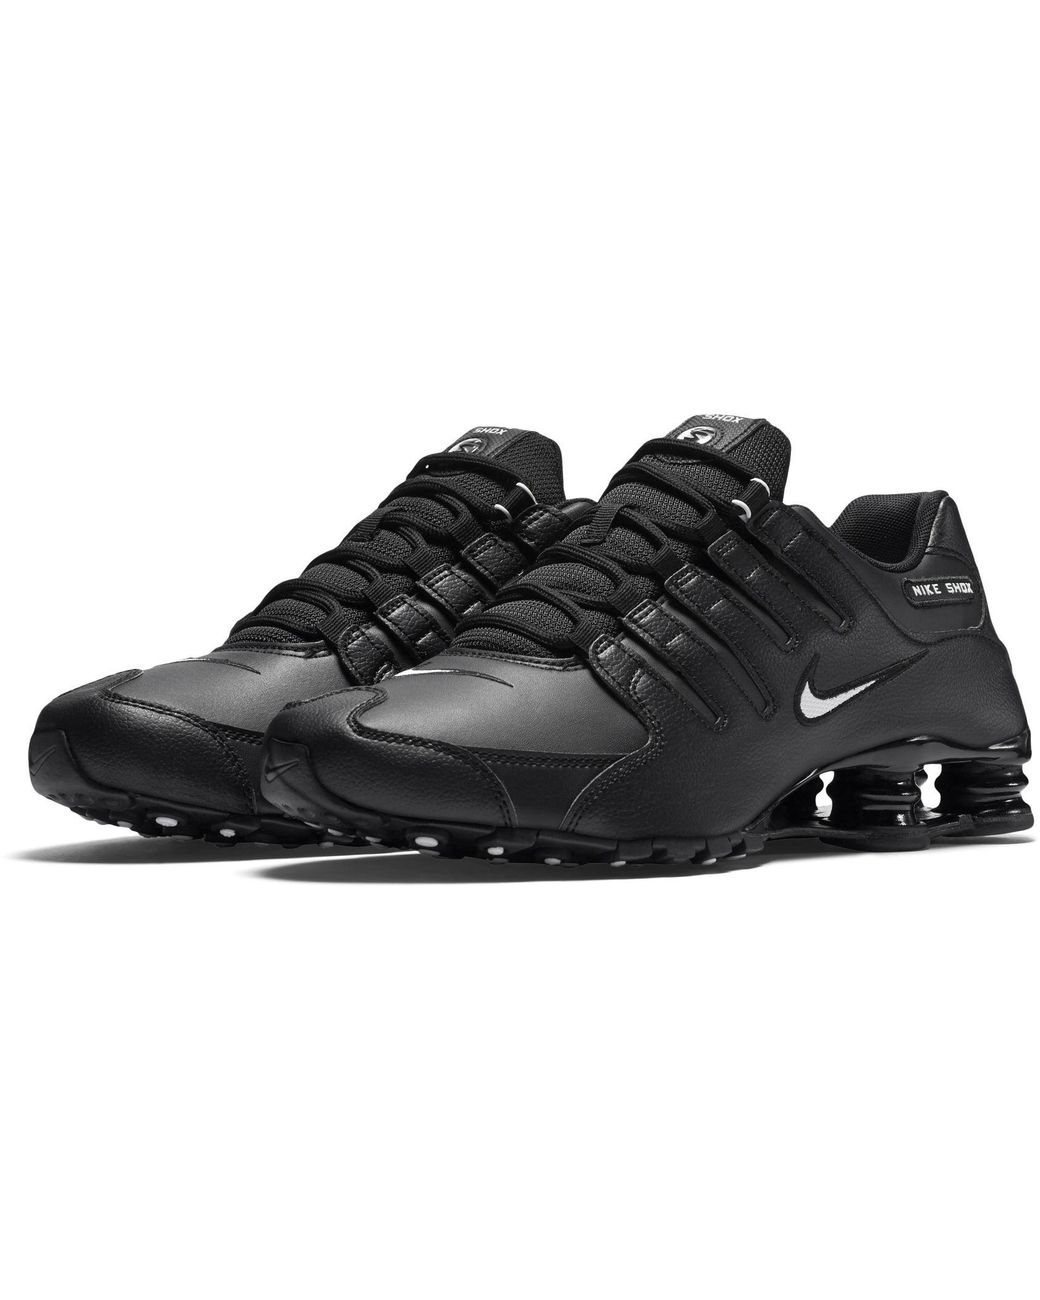 Nike Synthetic Shox Nz Eu in Black/White (Black) for Men - Save 38% - Lyst